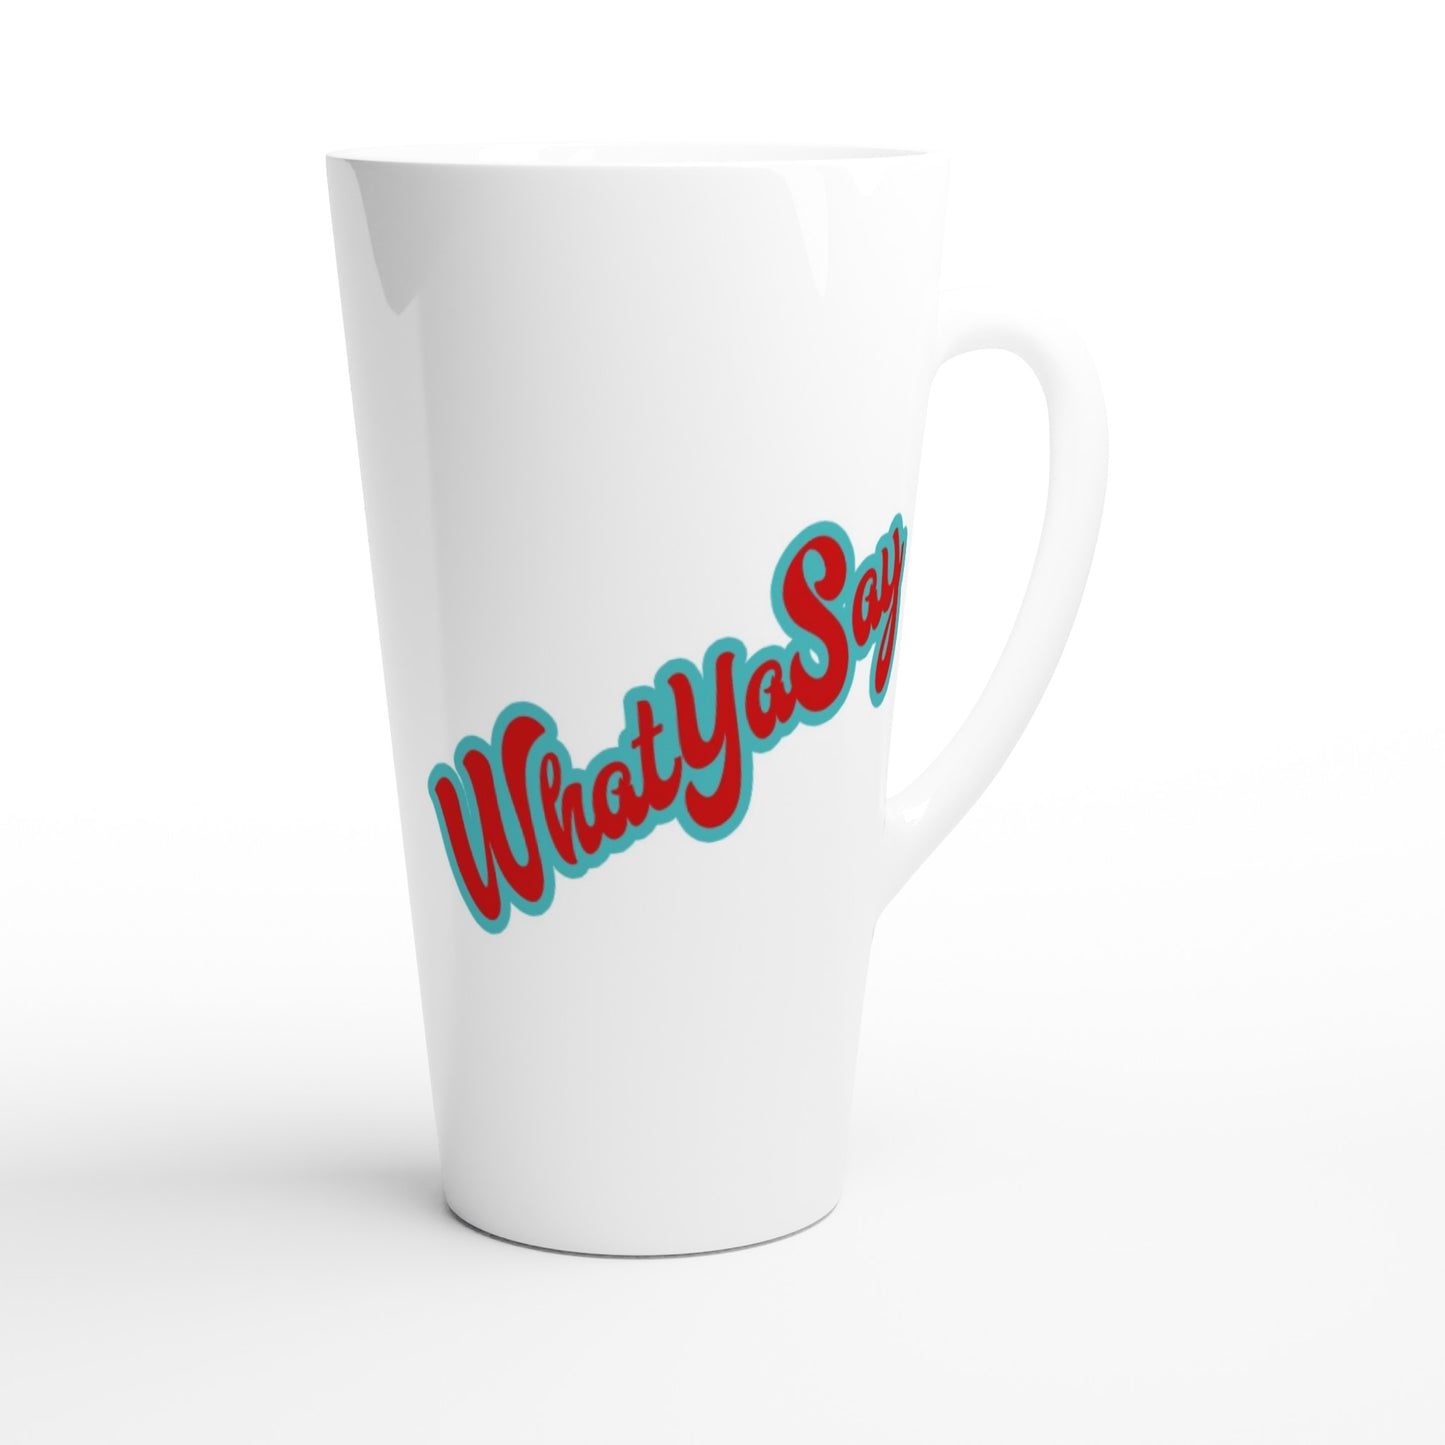 Seventeener white ceramic 17oz mug with motto I Got 99 Problems But a Margarita Aint One and WhatYa Say logo on back dishwasher and microwave safe from WhatYa Say Apparel back view. 